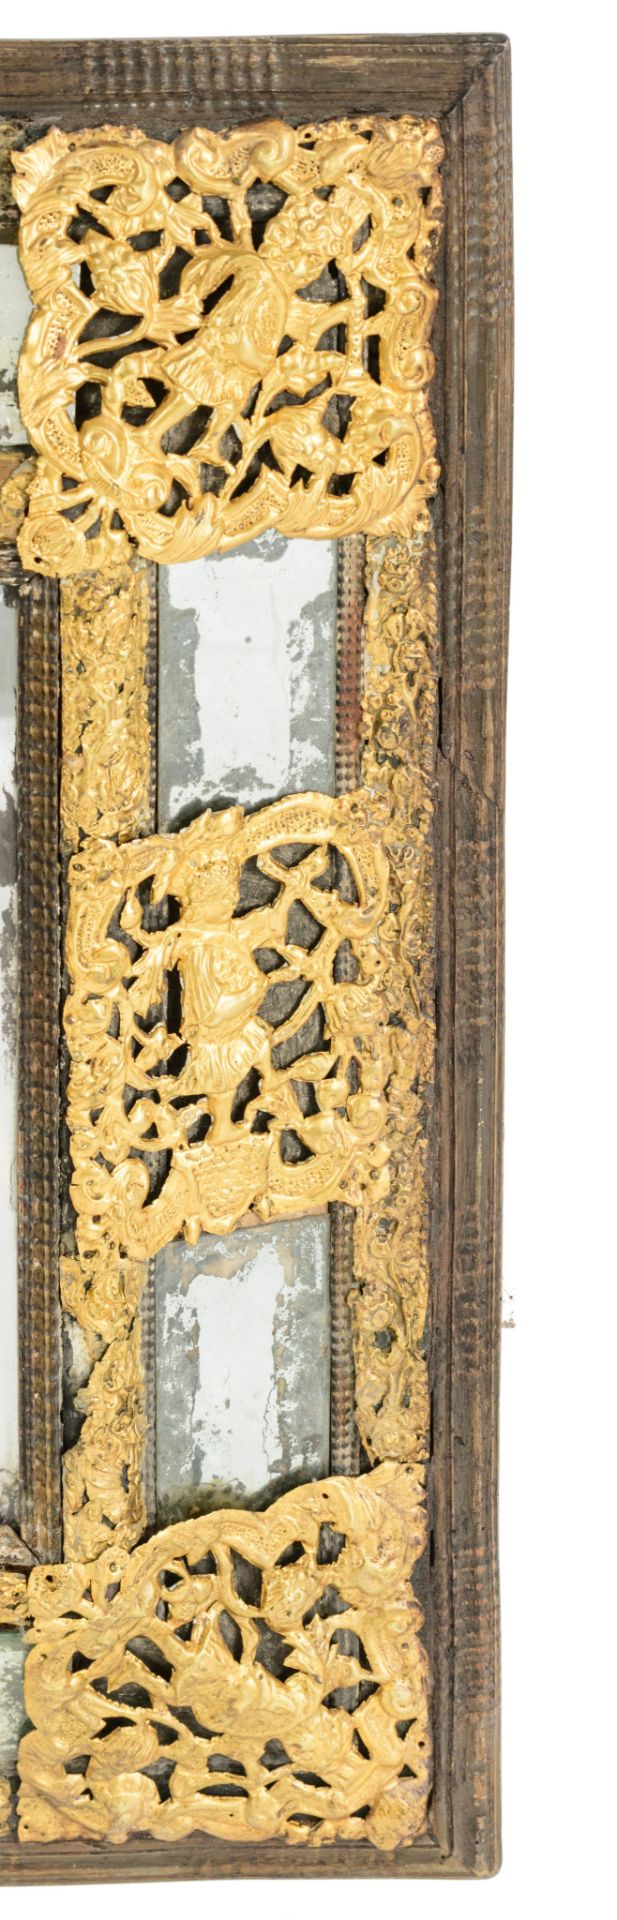 A Baroque wall mirror, with gilt and openworked brass fittings, 17th/18thC, 62 x 66 cm - Image 5 of 5